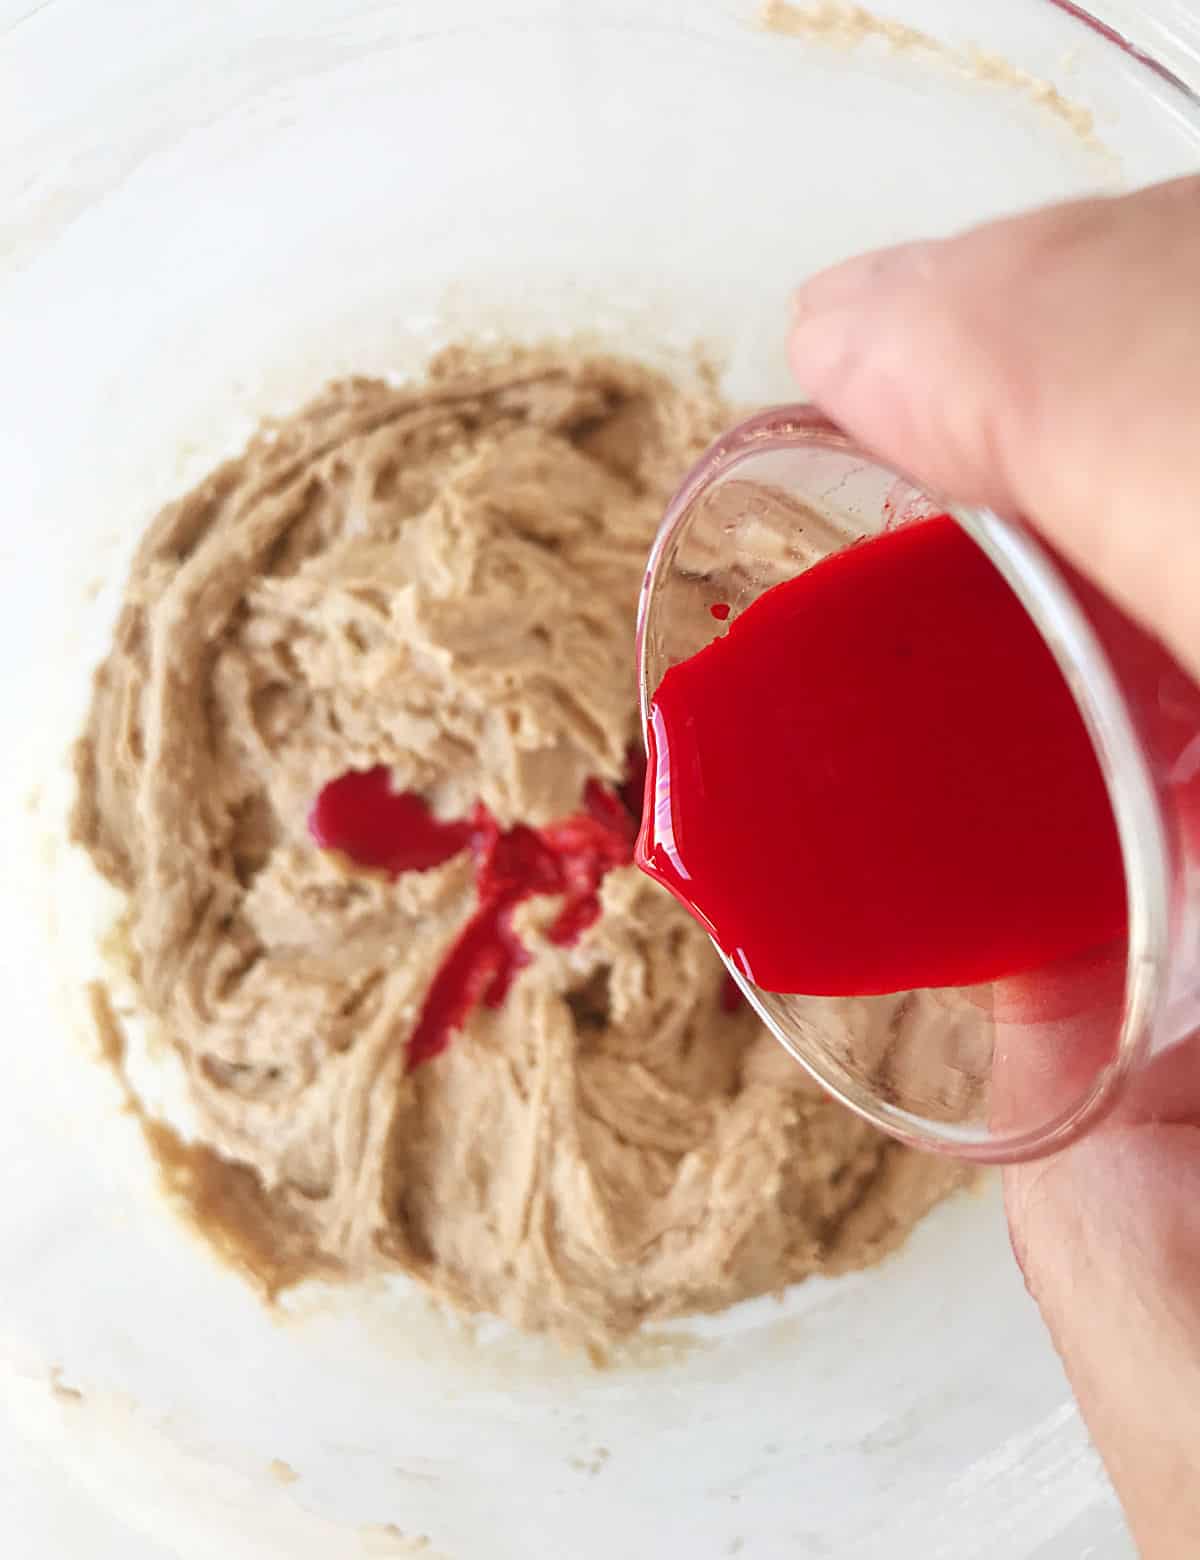 Adding liquid red coloring to light chocolate batter in a bowl